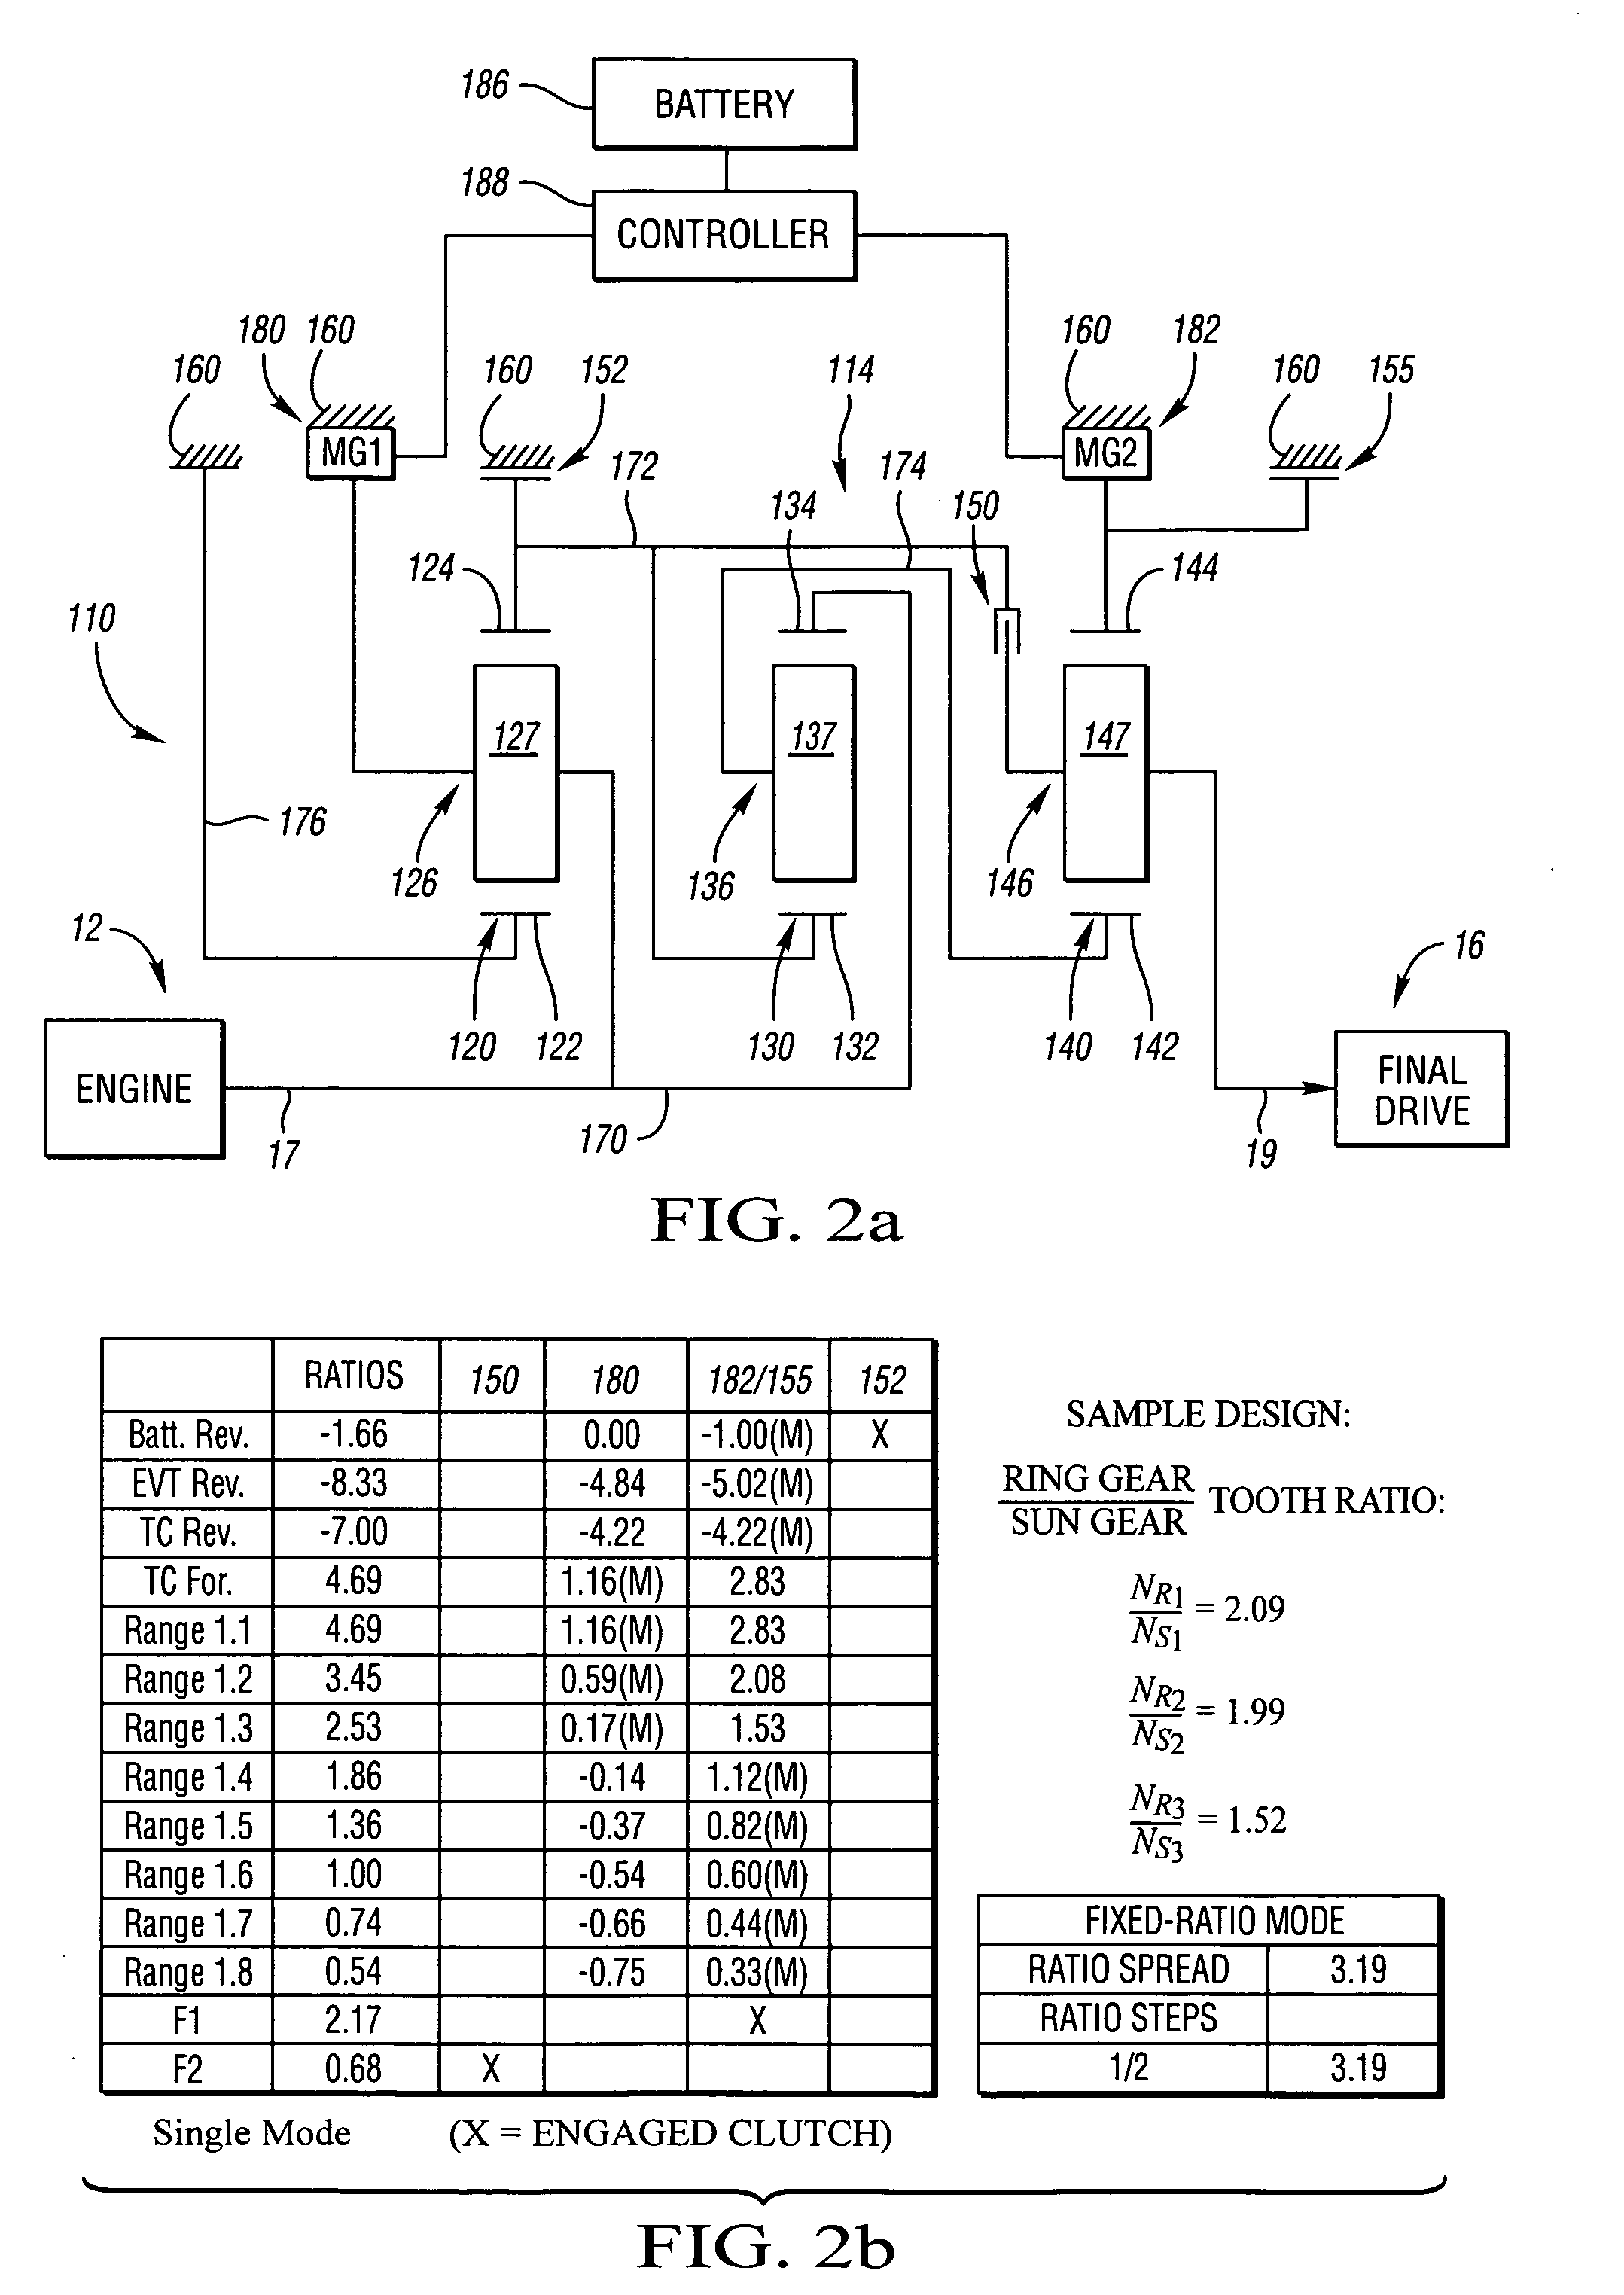 Electrically variable transmission having three planetary gearsets and four fixed interconnections